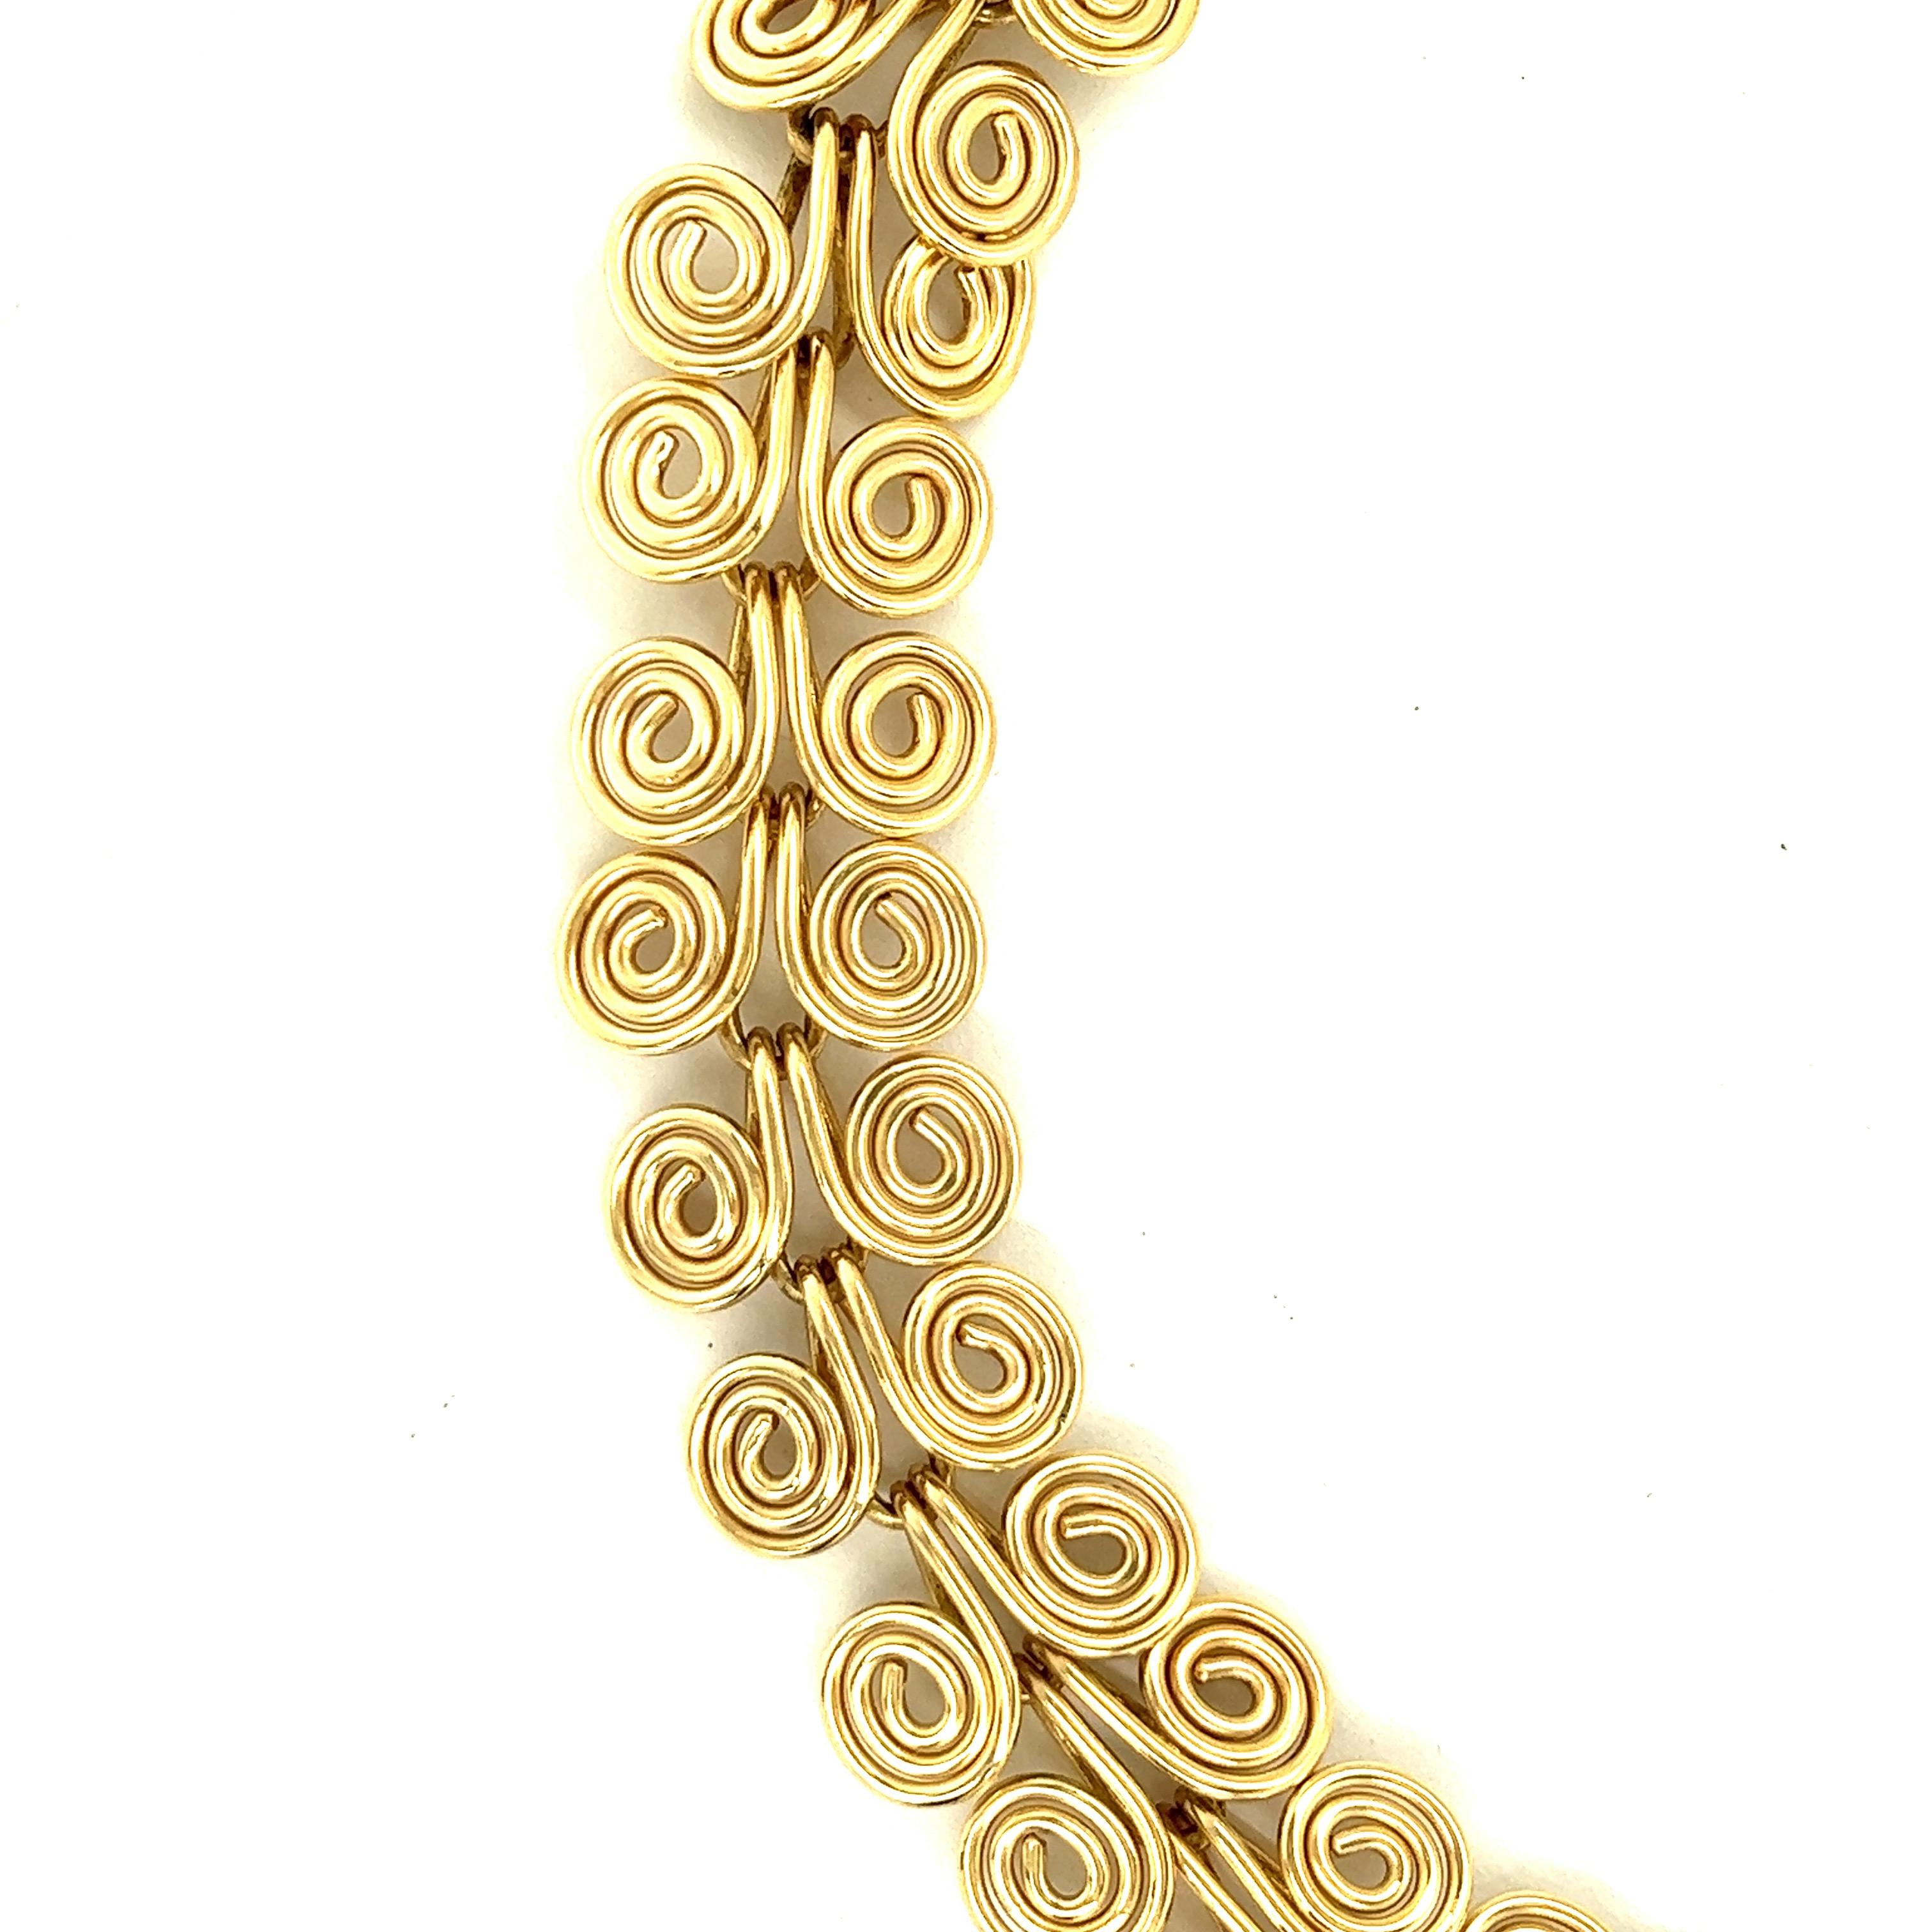 Swirl Design 14k Yellow Gold Necklace

Collar necklace made of multiple links that feature a swirl motif, made of 14 karat yellow gold

Size: width 2 cm, length 40 cm
Total weight: 89.6 grams 